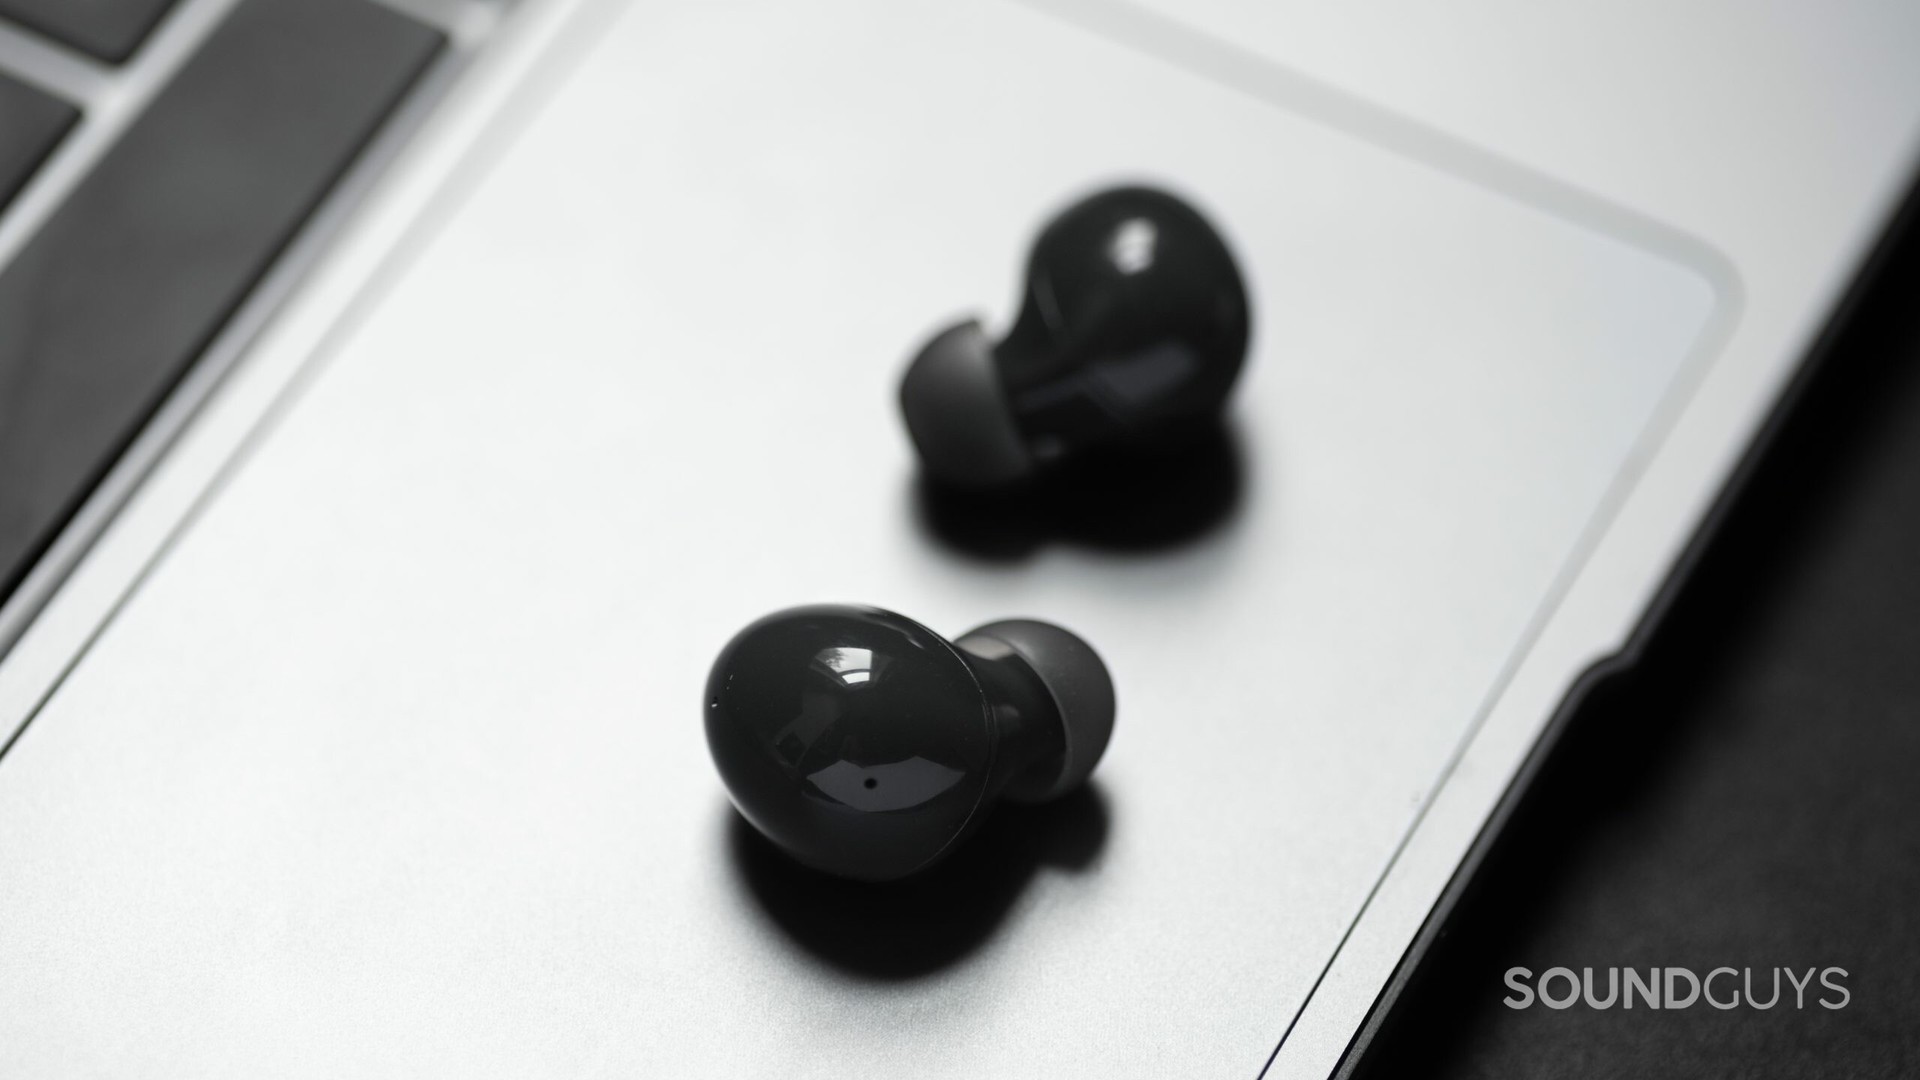 Samsung Galaxy Buds 2 noise cancelling true wireless earbuds